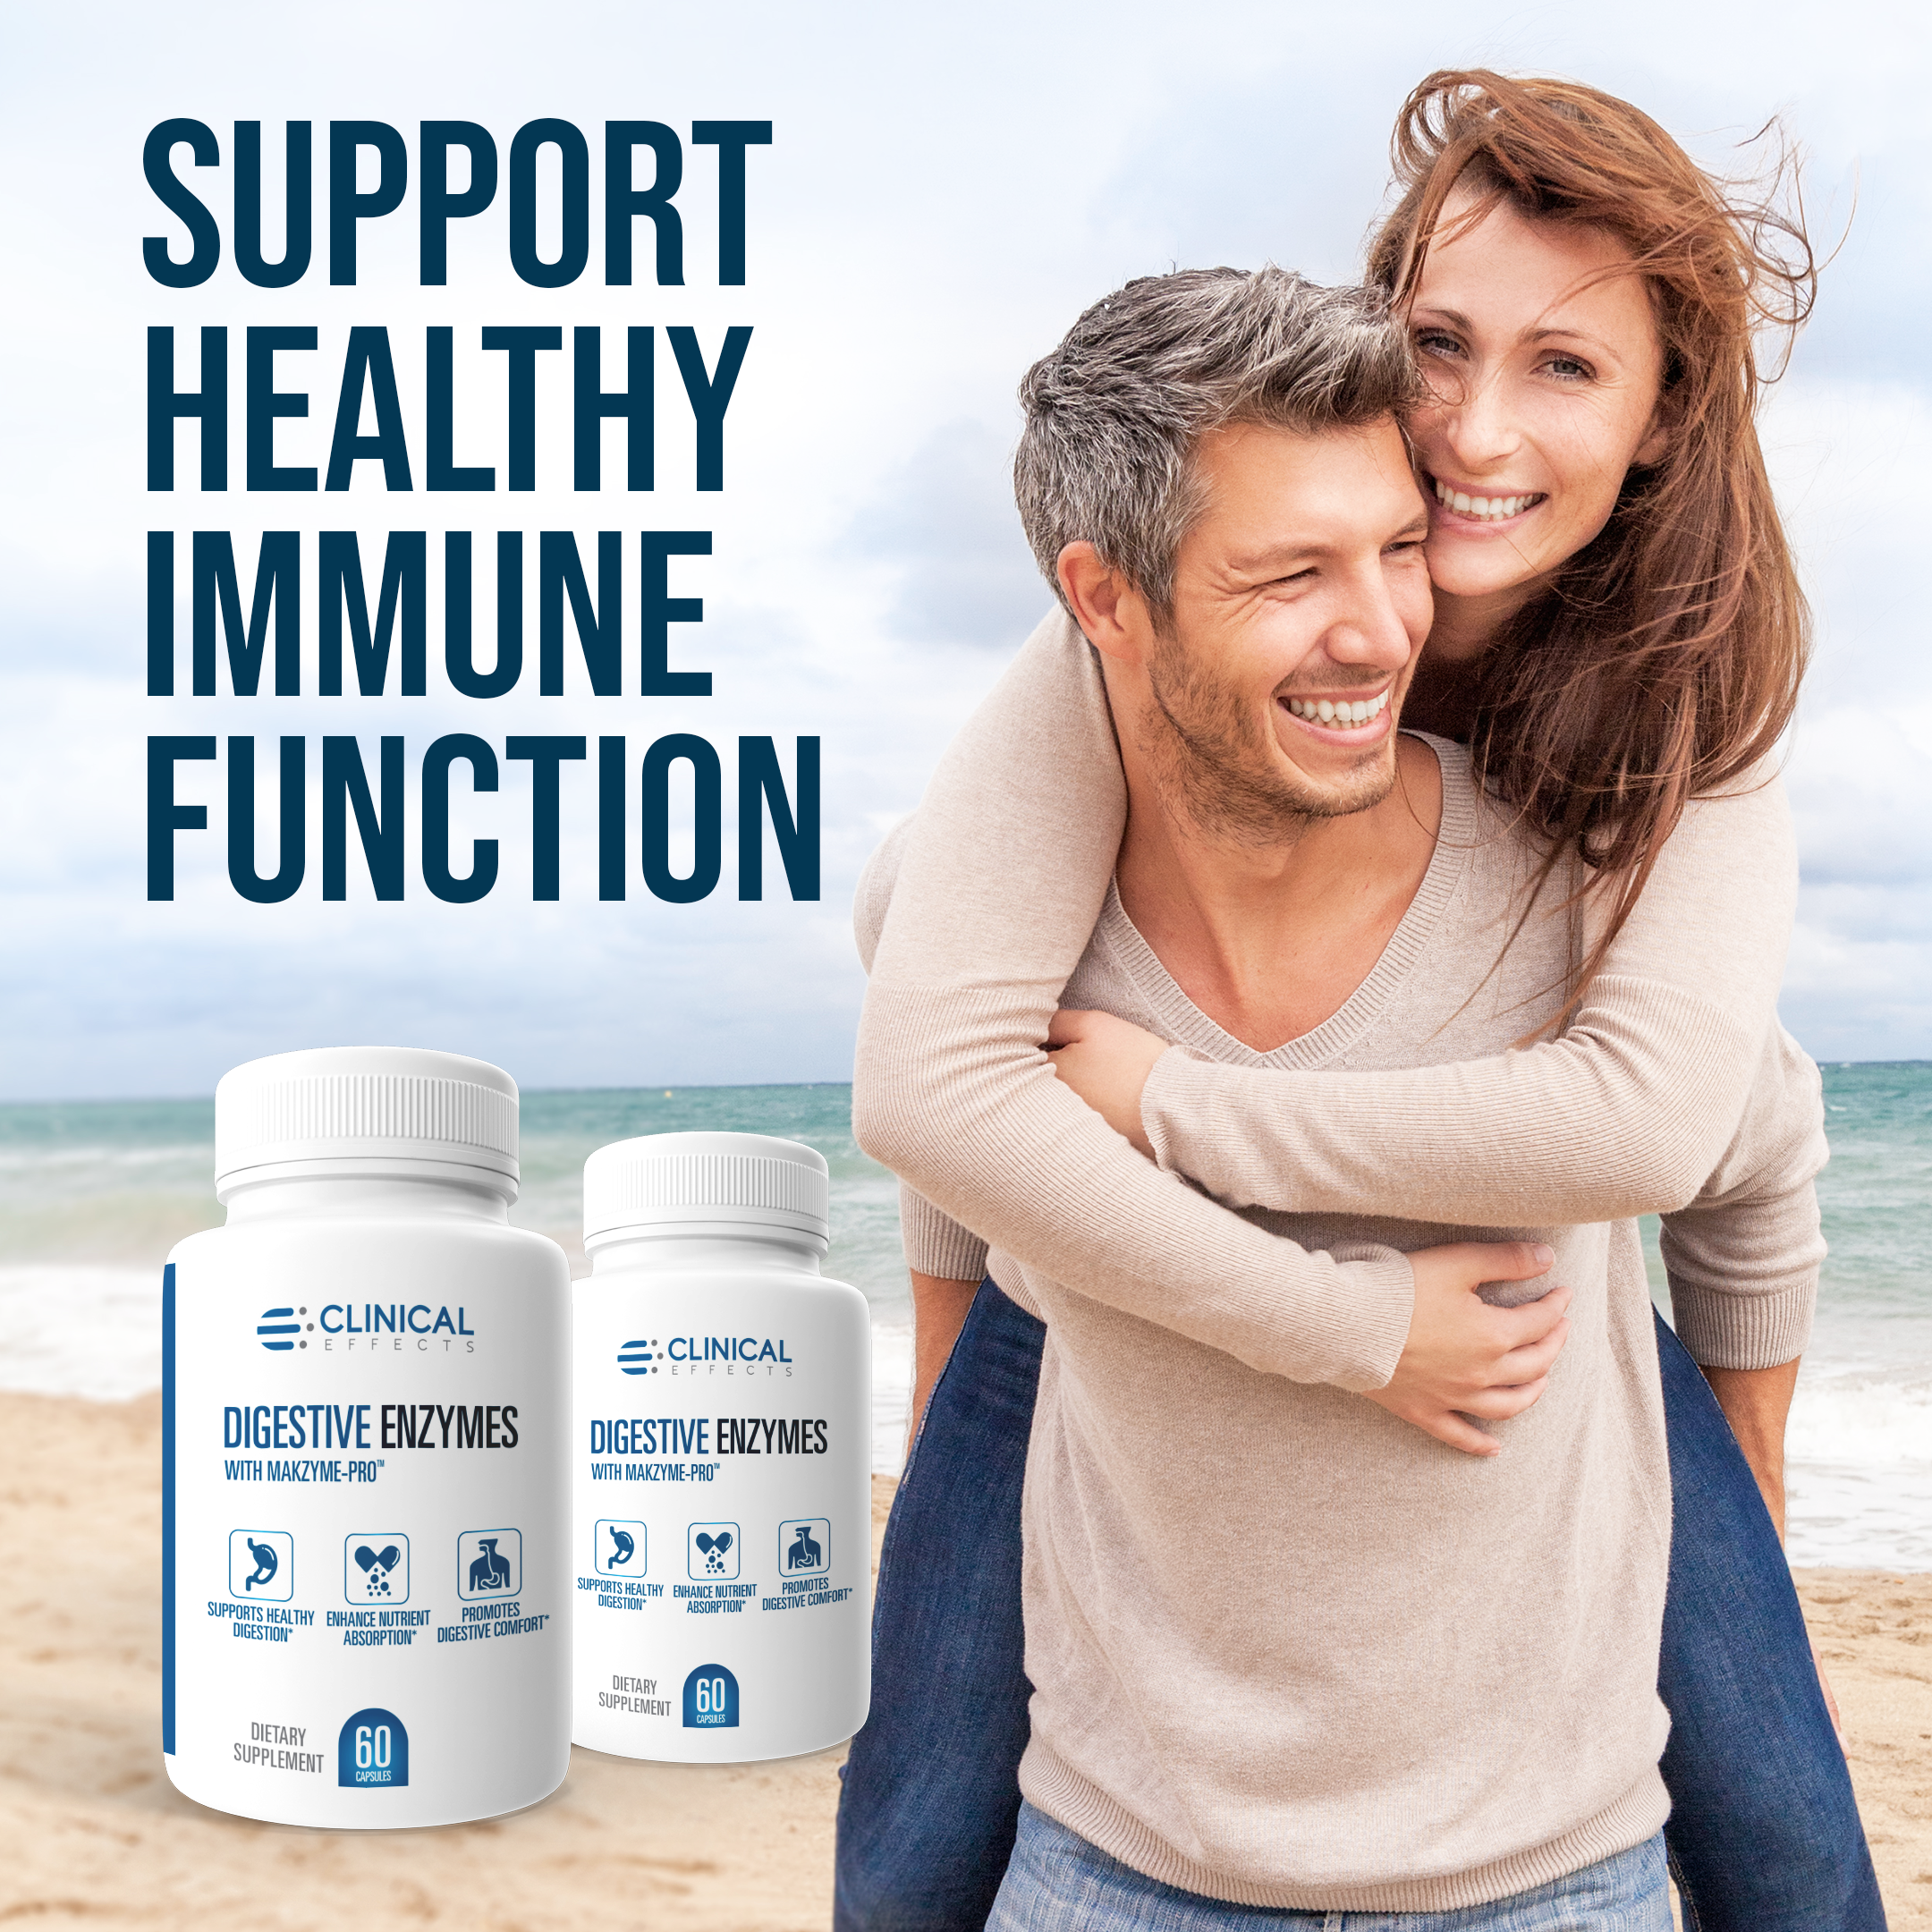 Support healthy immune function